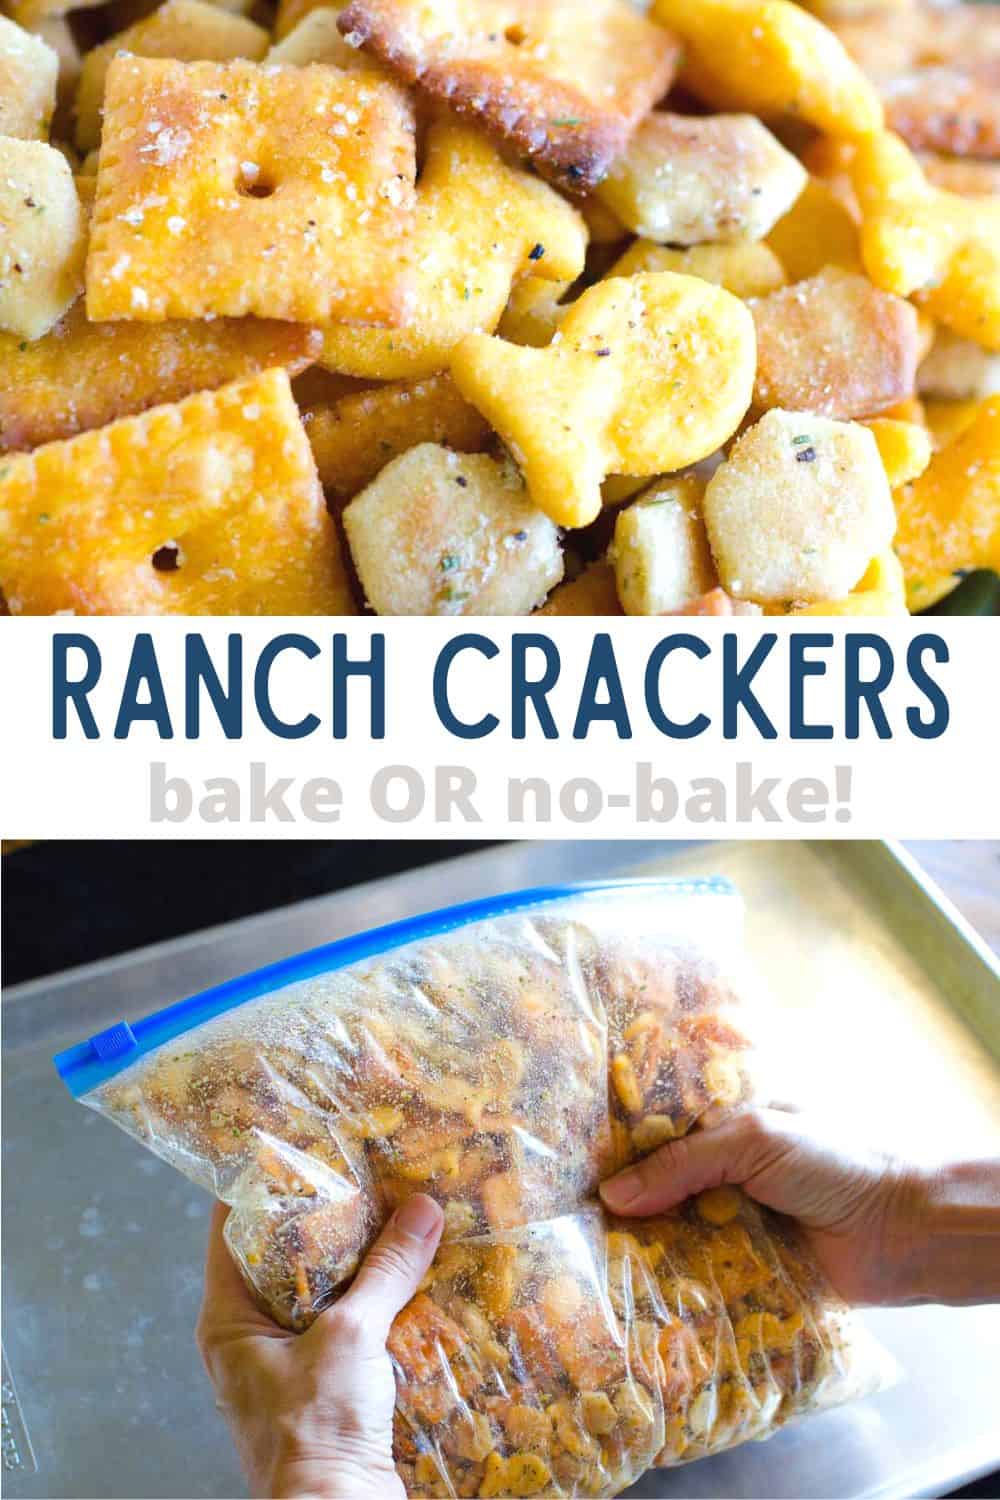 Similar to everyone's favorite ranch oyster crackers, these also include other favorite snack crackers. These addictive crackers are ready in a jiffy and gobbled up even faster!